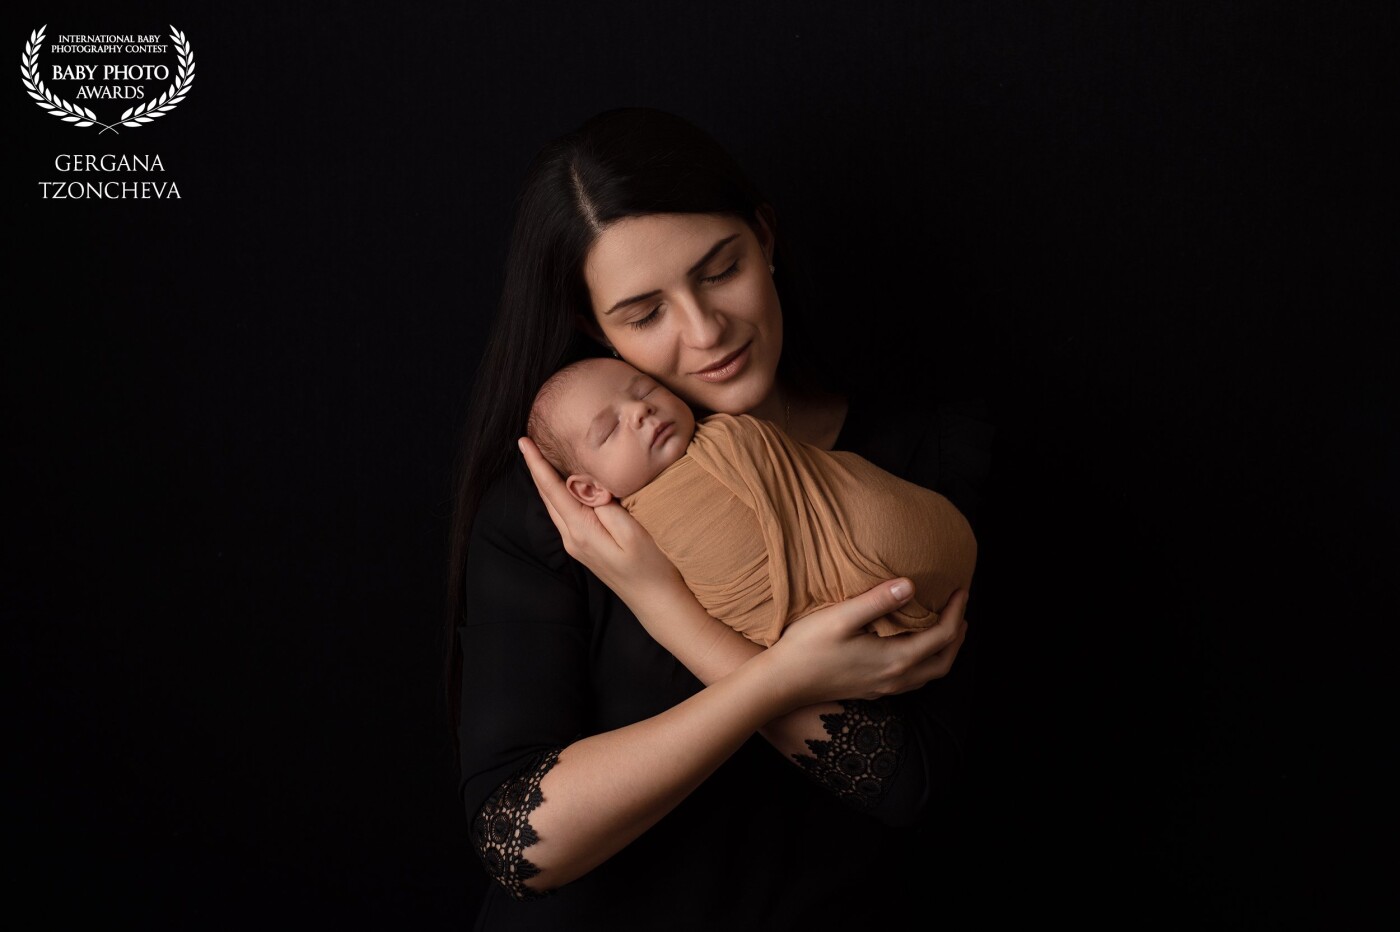 There is so much tenderness in this image. Whenever I ask mom to hold the baby like this, I don't even have to direct her to close her eyes -  the subtle smile and the gentle expression just come naturally.